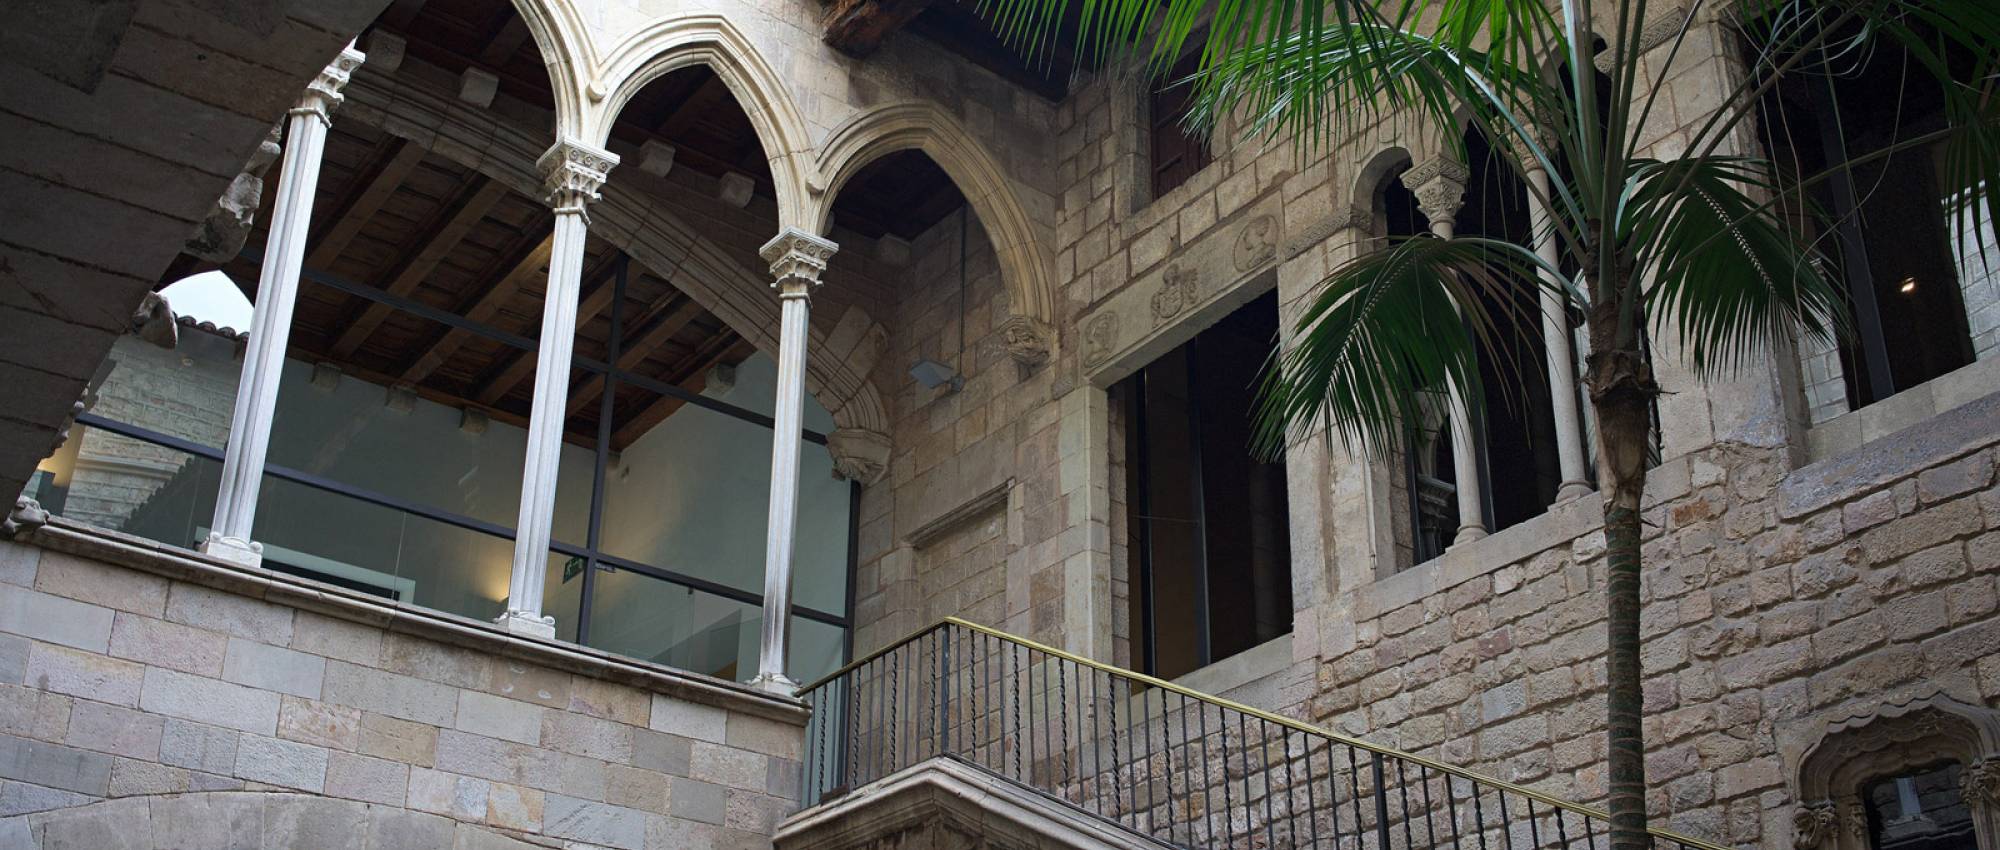 Picasso Museum | Cultural Heritage. Goverment of Catalonia.2000 x 850